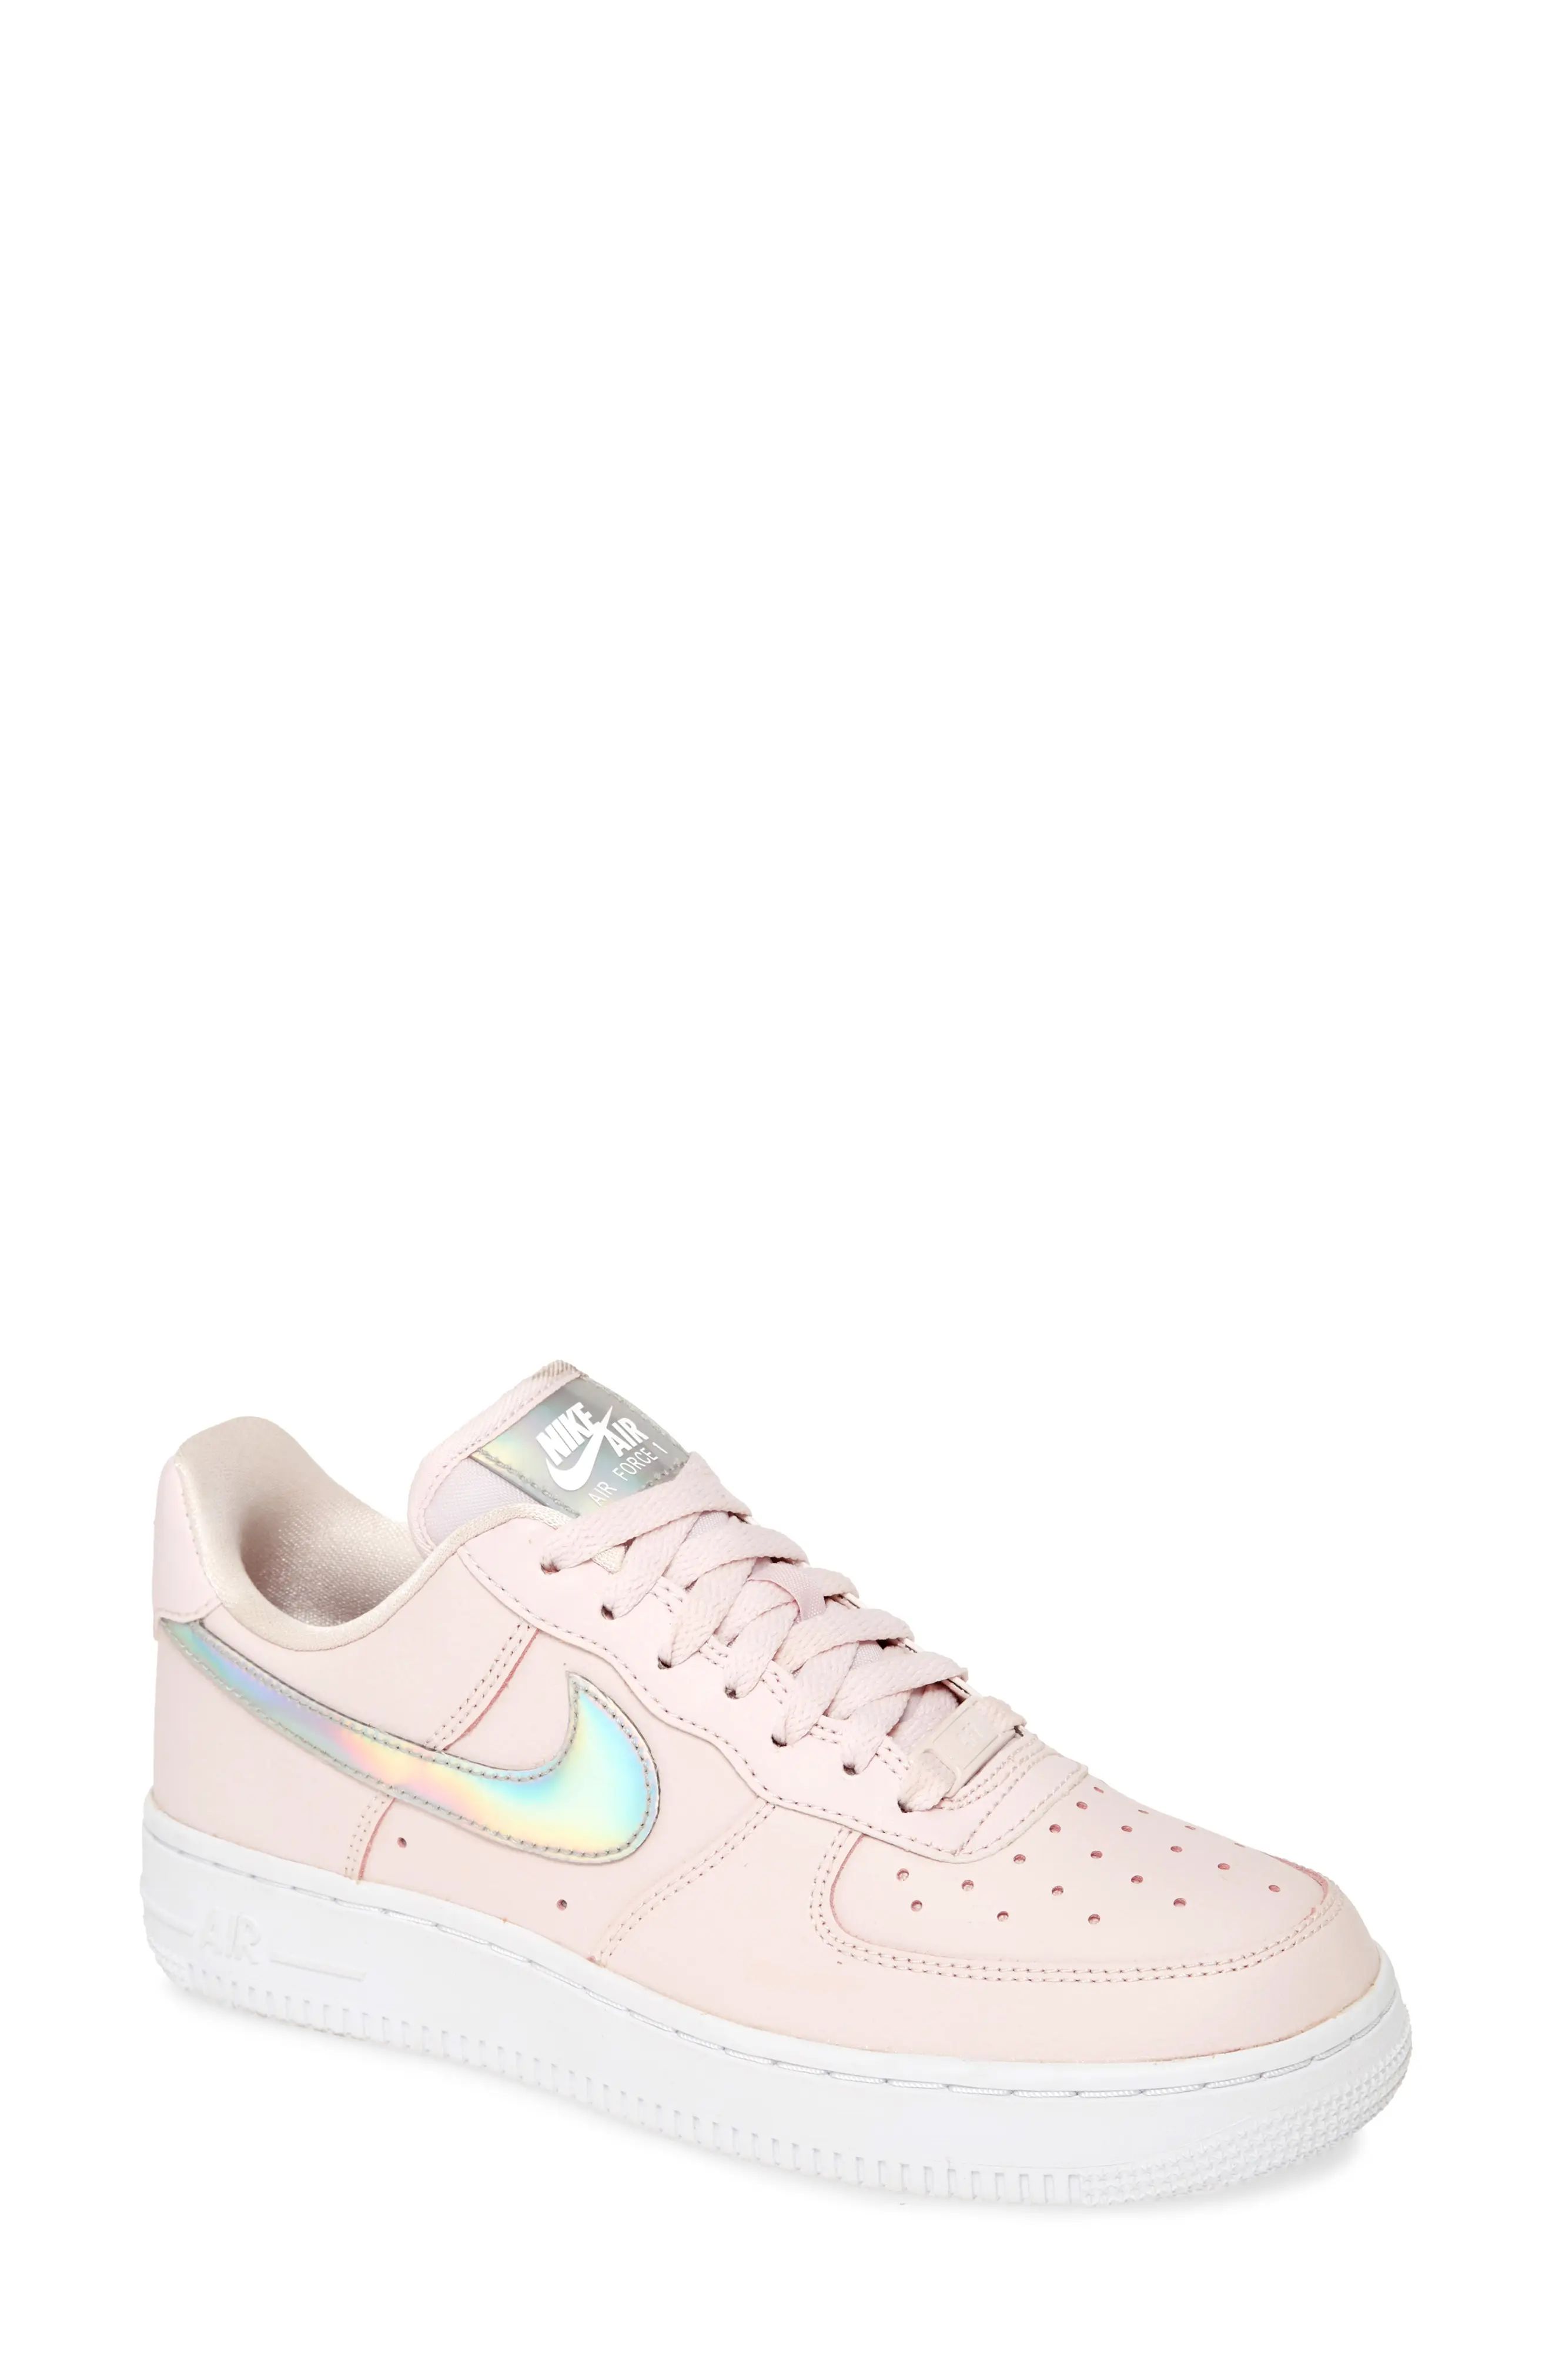 Women's Nike Air Force 1 Low Ess Sneaker, Size 10 M - Pink | Nordstrom